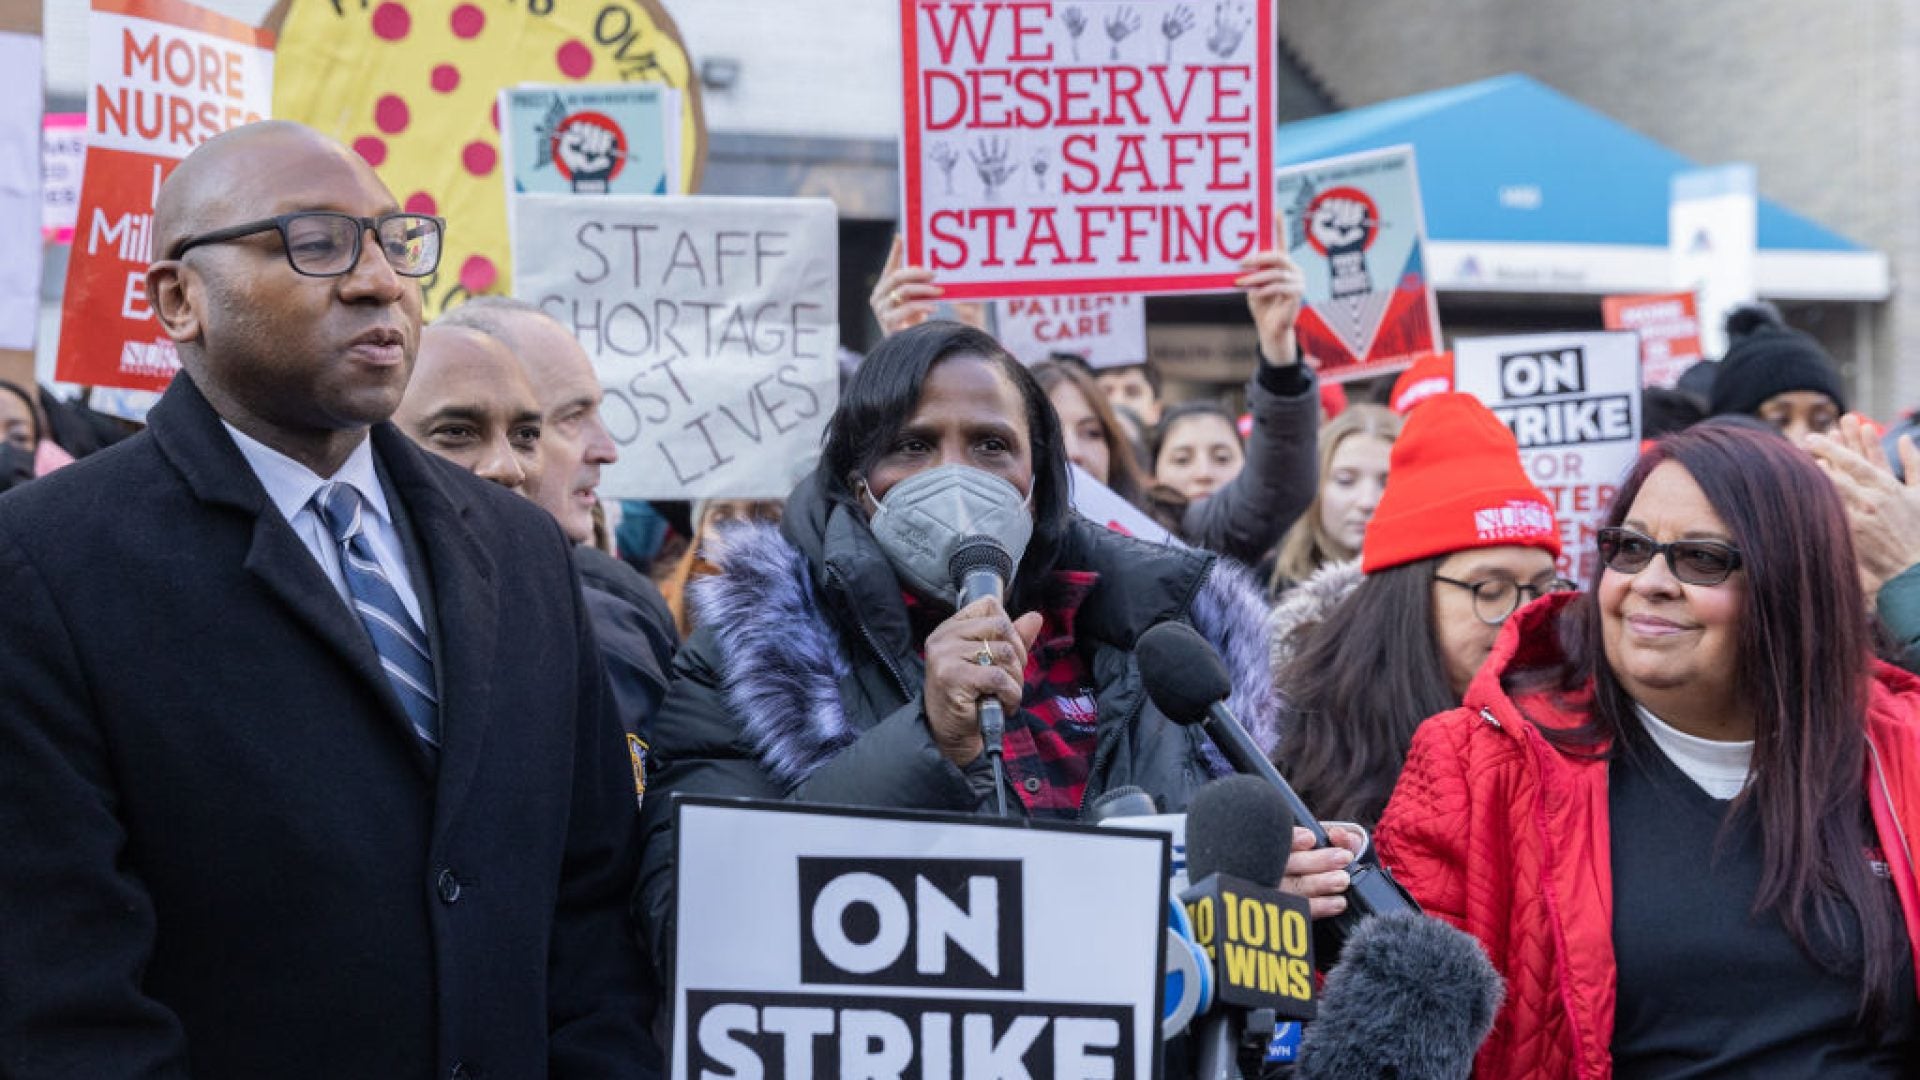 More Than 7,000 Nurses Are On Strike In New York City: Here's Why